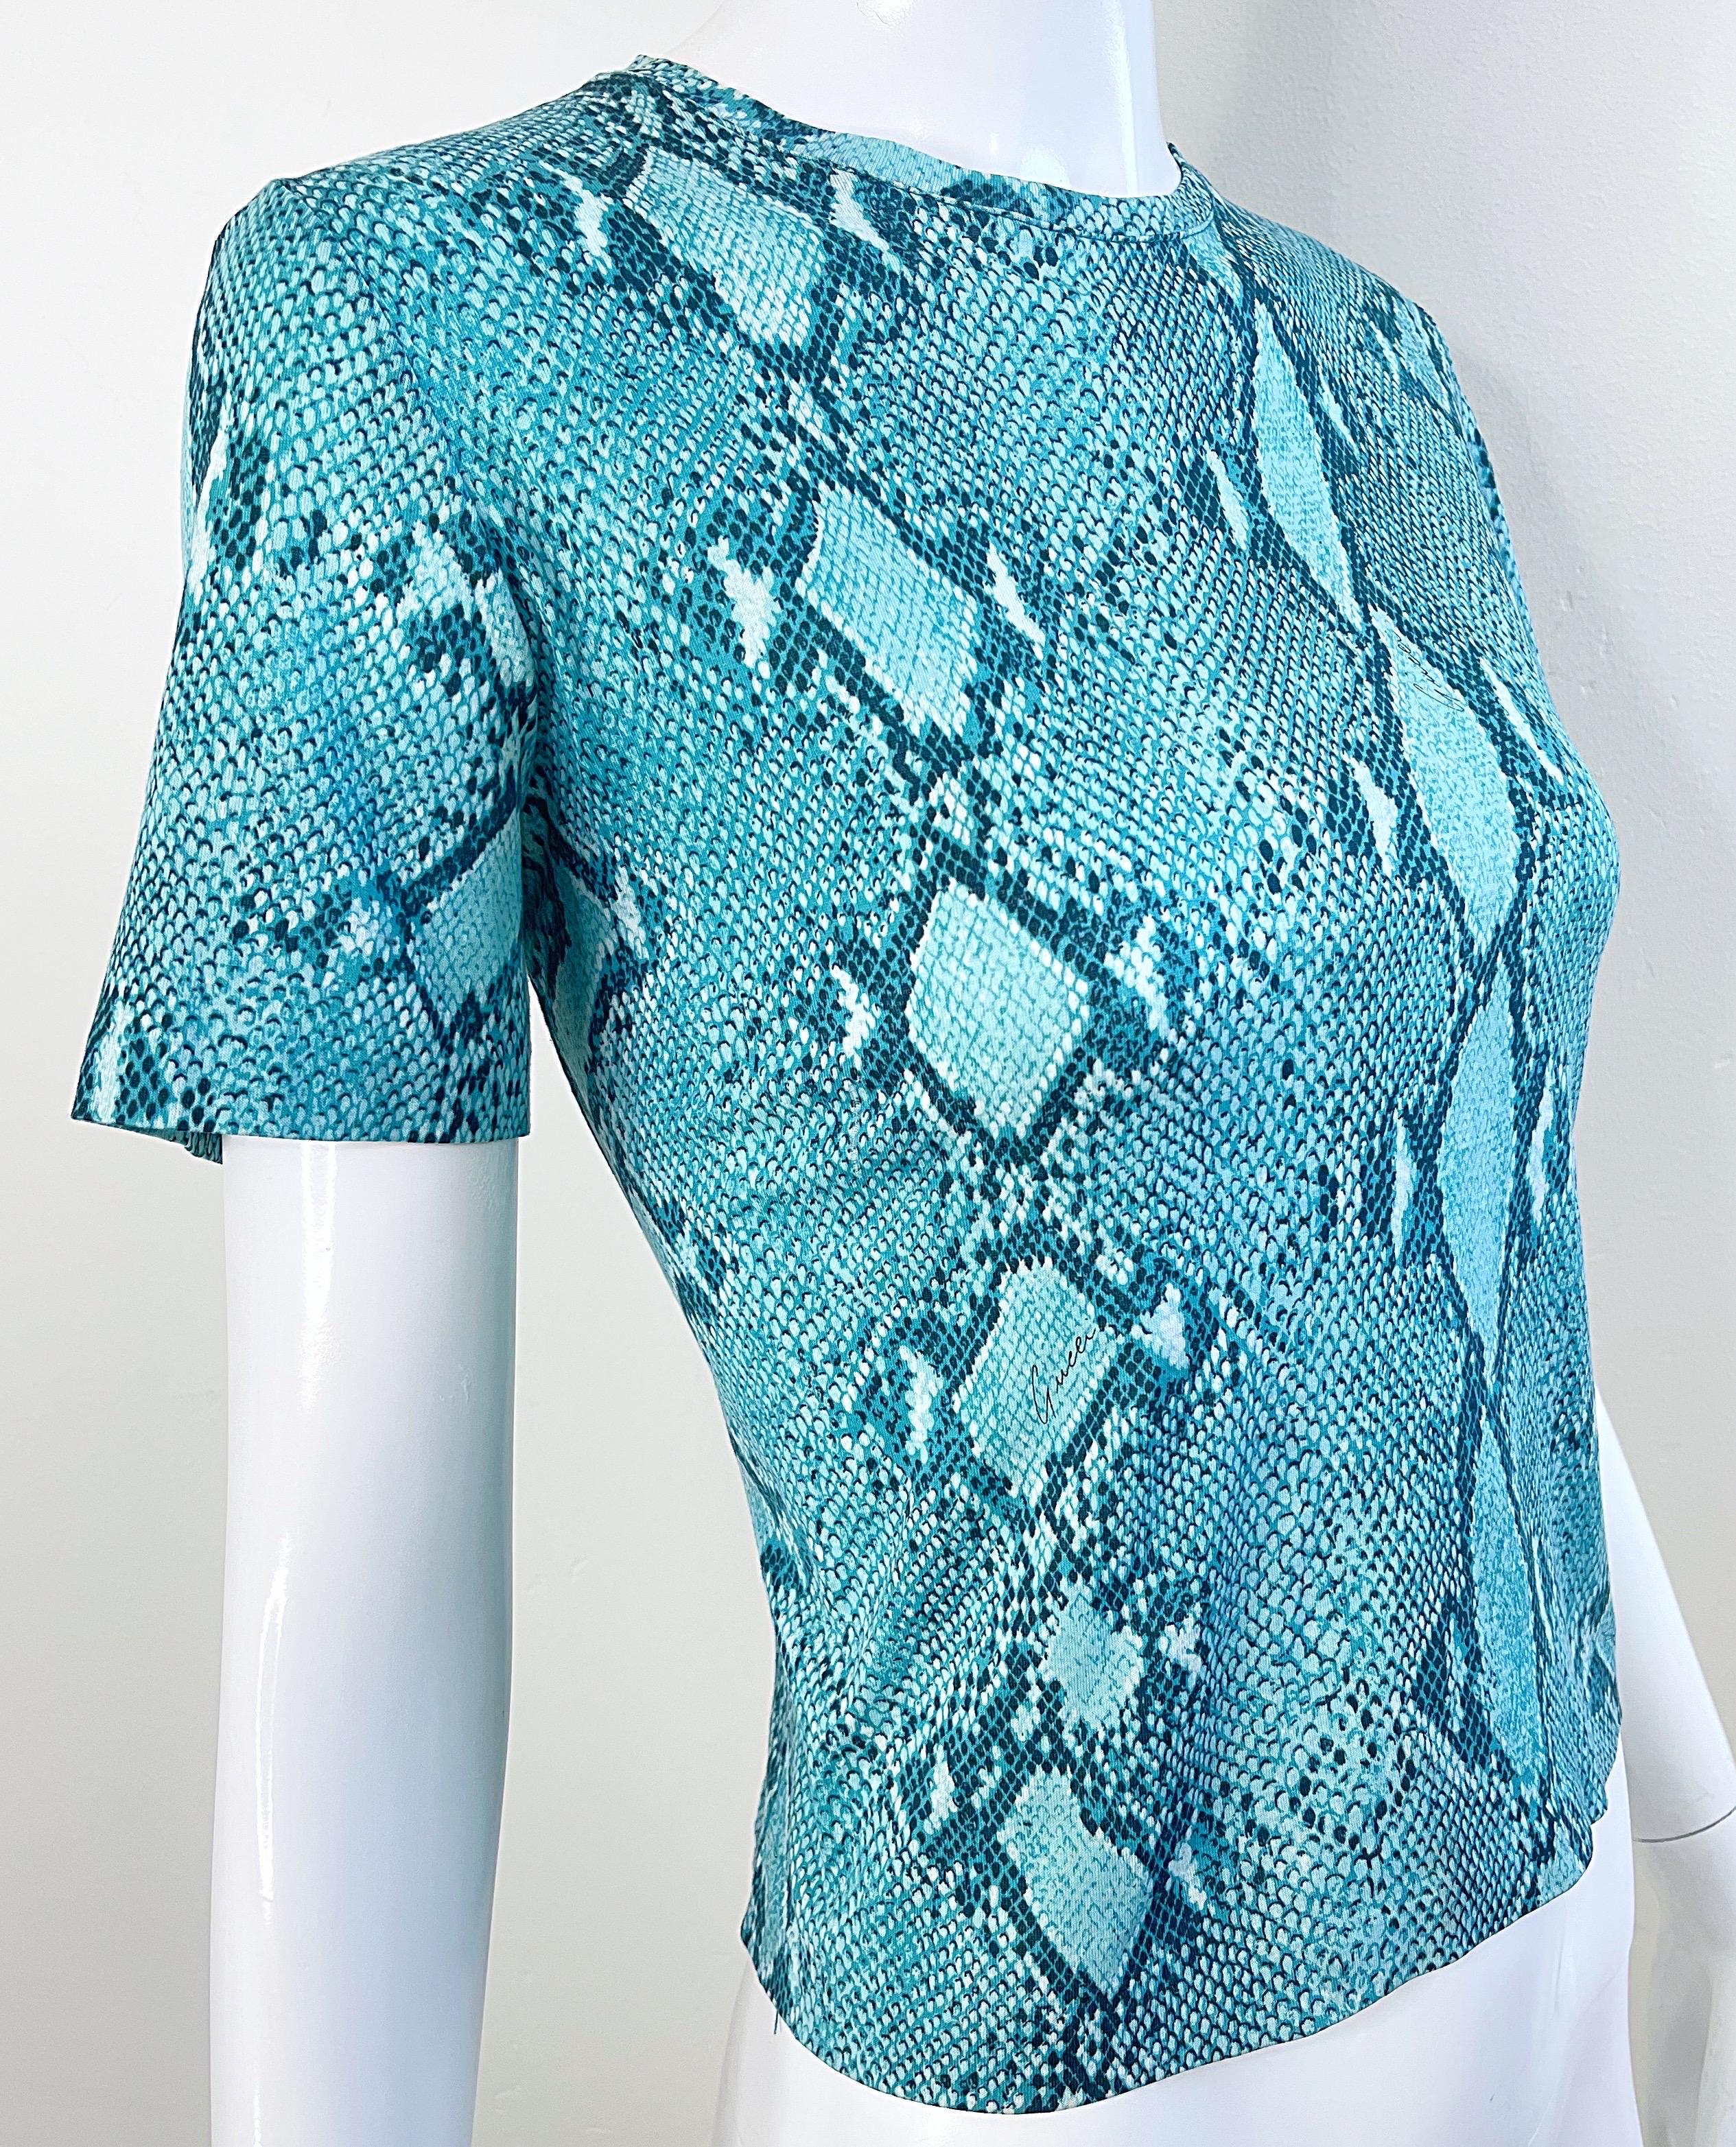 Gucci by Tom Ford Spring 2000 Turquoise Blue Snake Print Vintage Tee Shirt Y2K For Sale 3